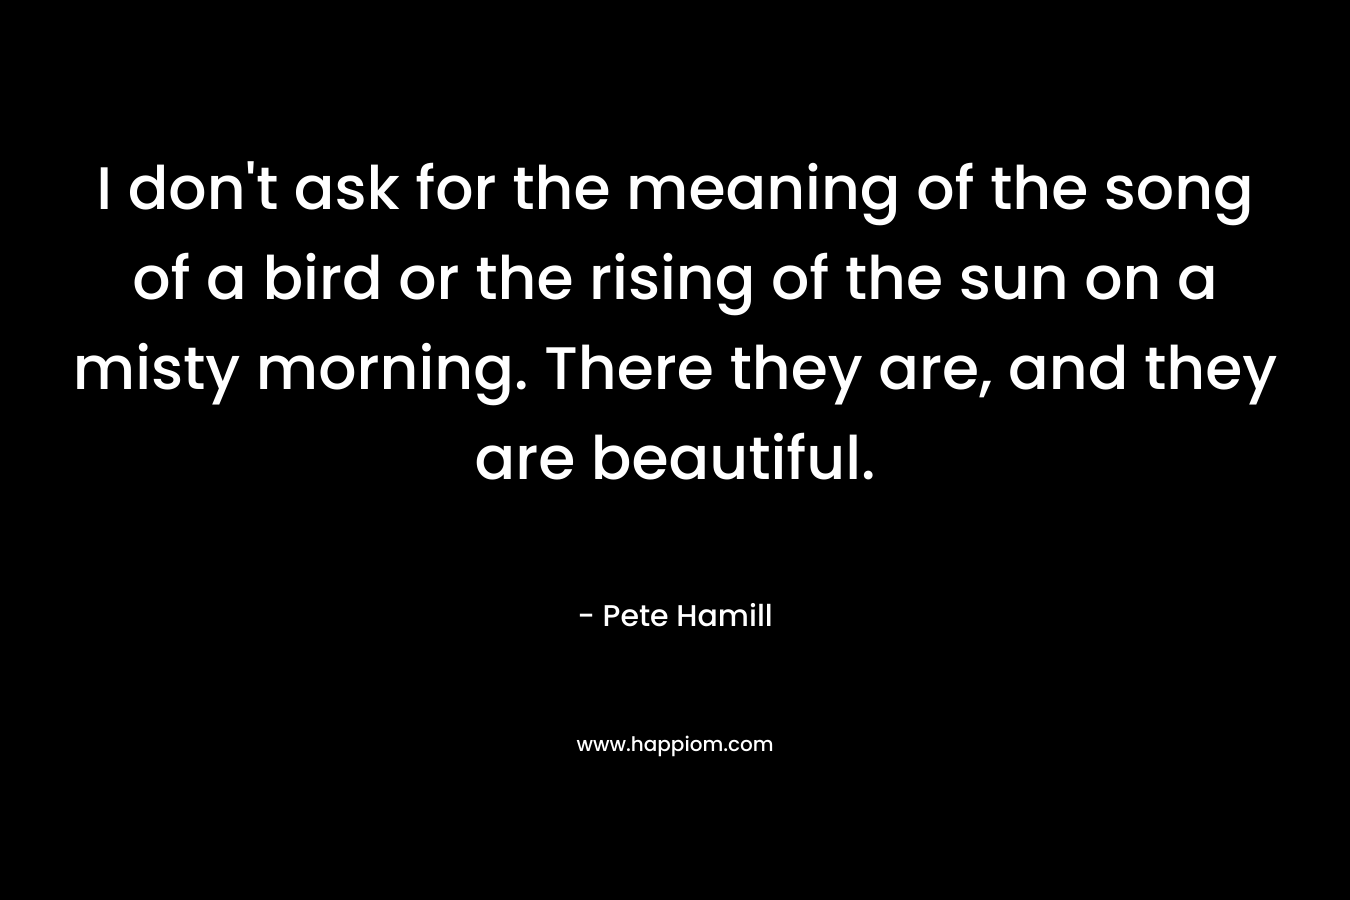 I don't ask for the meaning of the song of a bird or the rising of the sun on a misty morning. There they are, and they are beautiful.